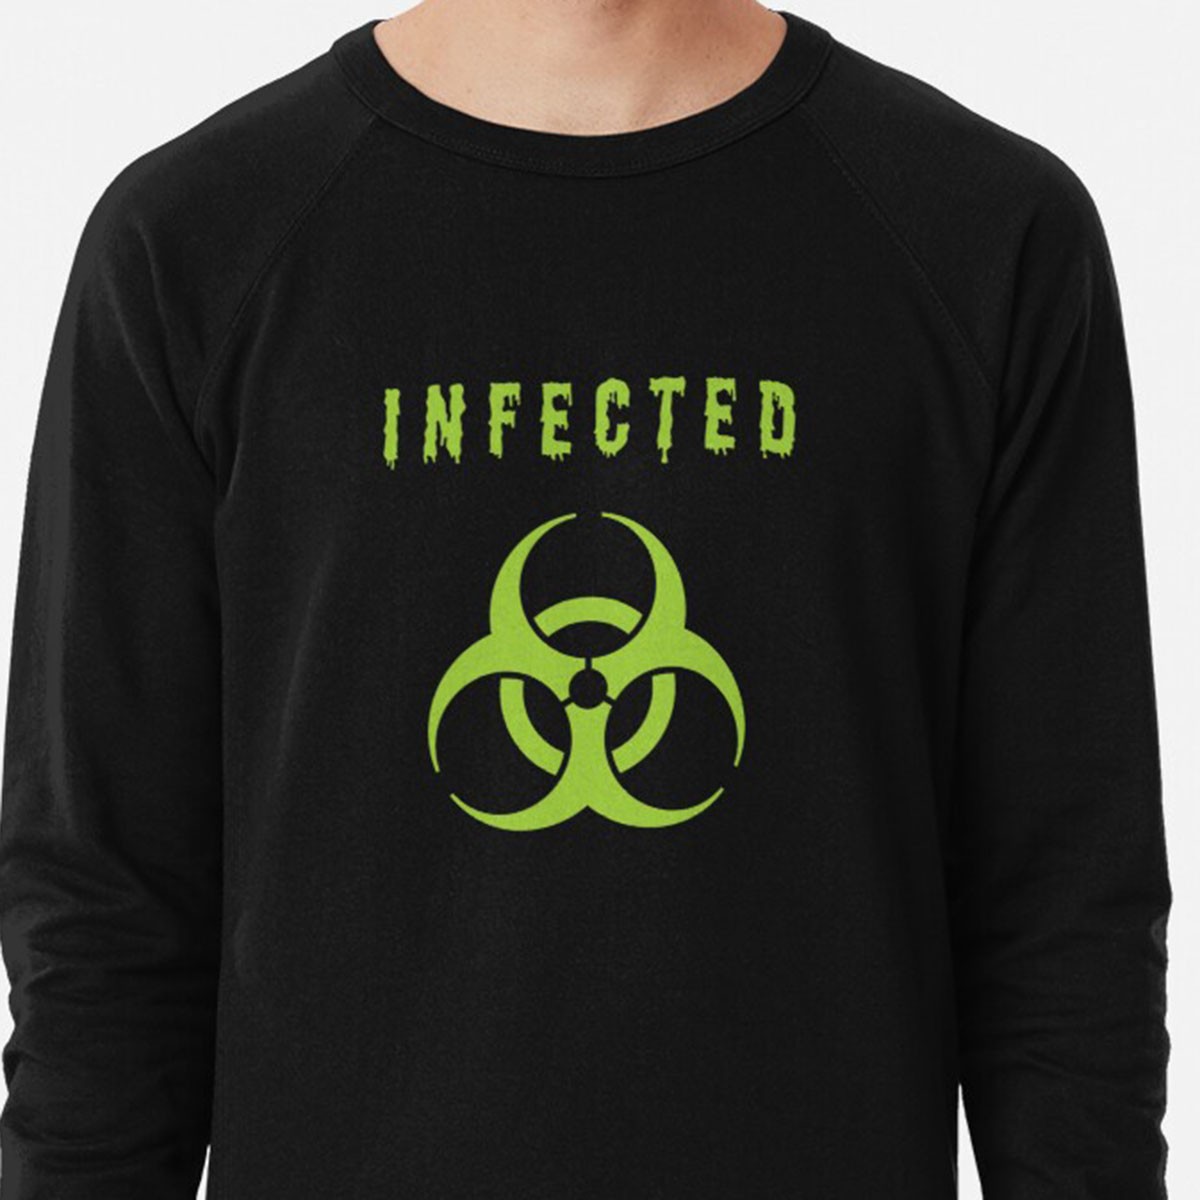 Infected - Let the world know to keep their distance - Lightweight sweatshirt by NTK Apparel